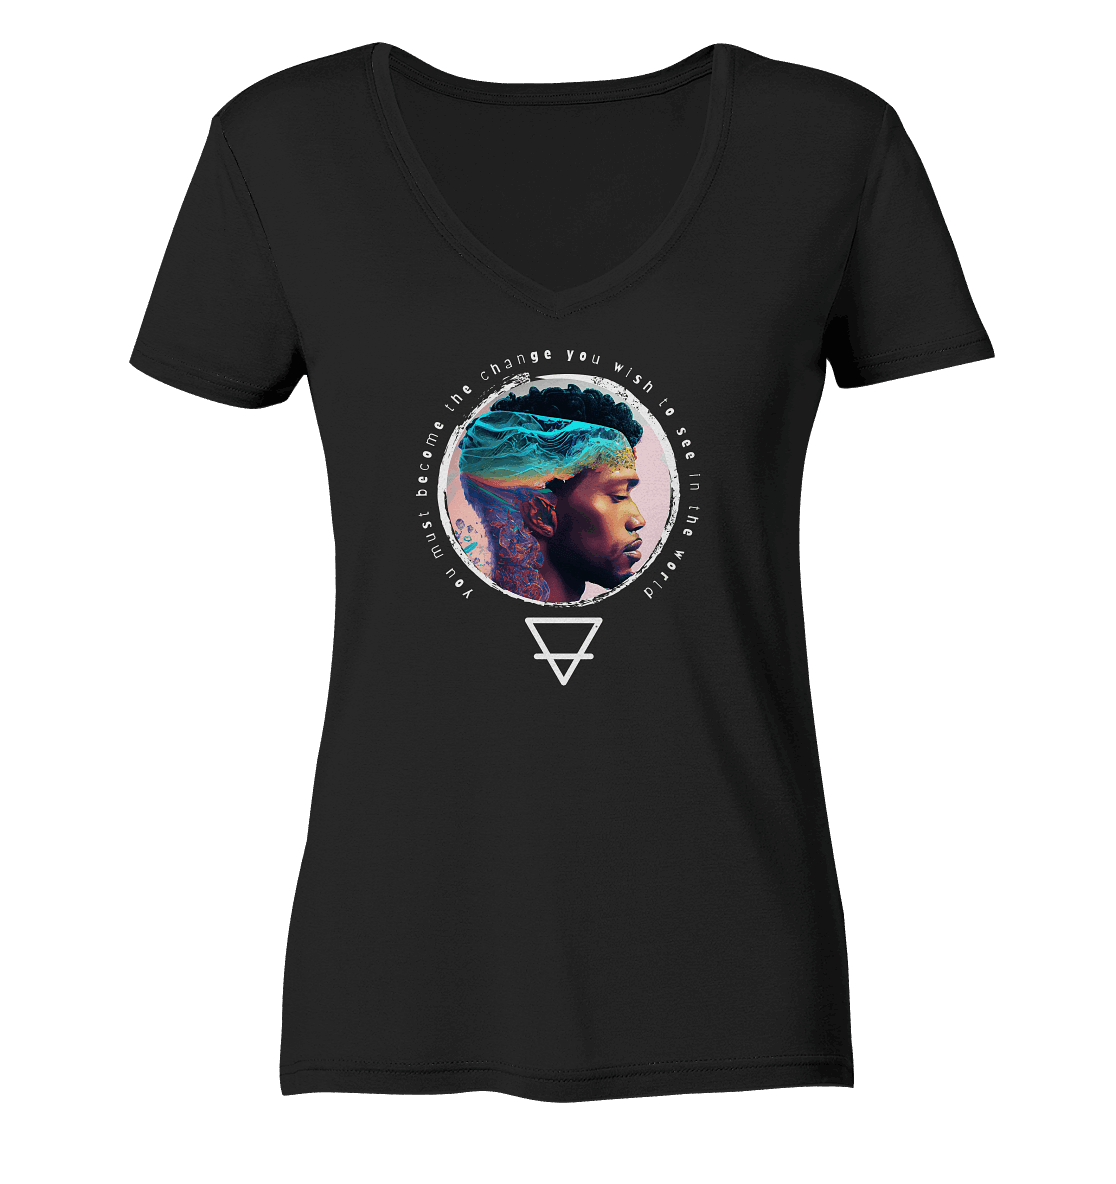 Nature - You must become the change you wish to see in the world - Ladies Organic V-Neck Shirt